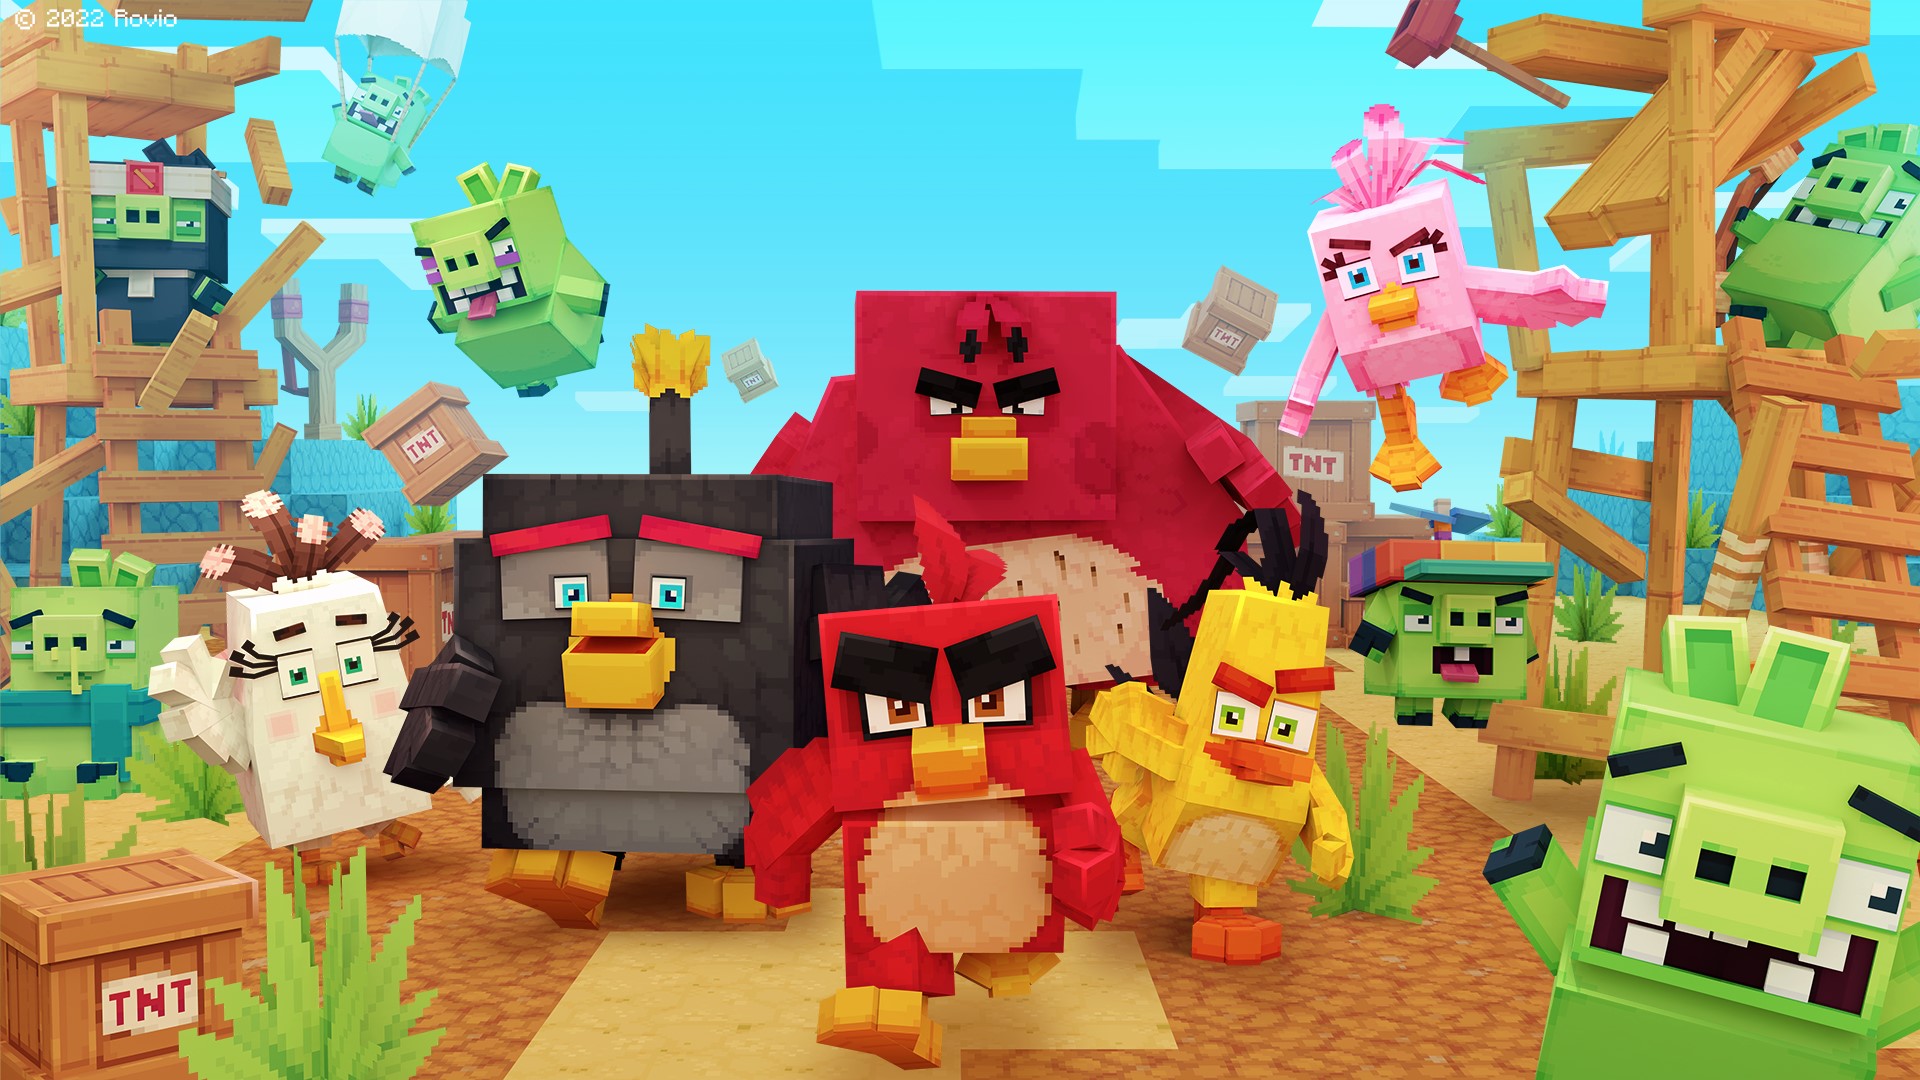 Launch into the Minecraft Angry Birds DLC Now in the Minecraft Marketplace